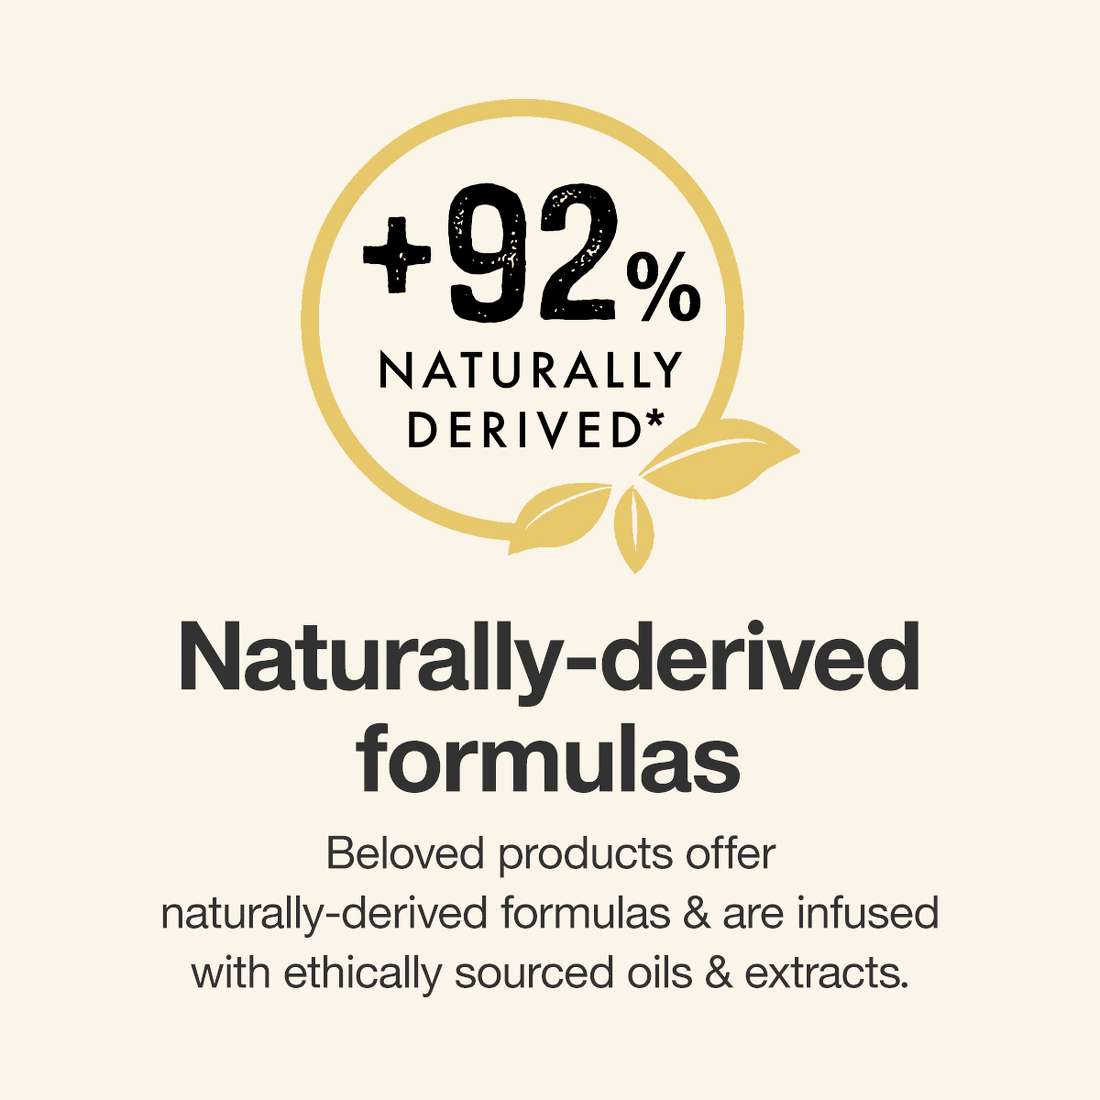 +92% Naturally-derived formulas
Beloved products offer naturally-derived formulas & are infused with ethically sourced oils & extracts.
